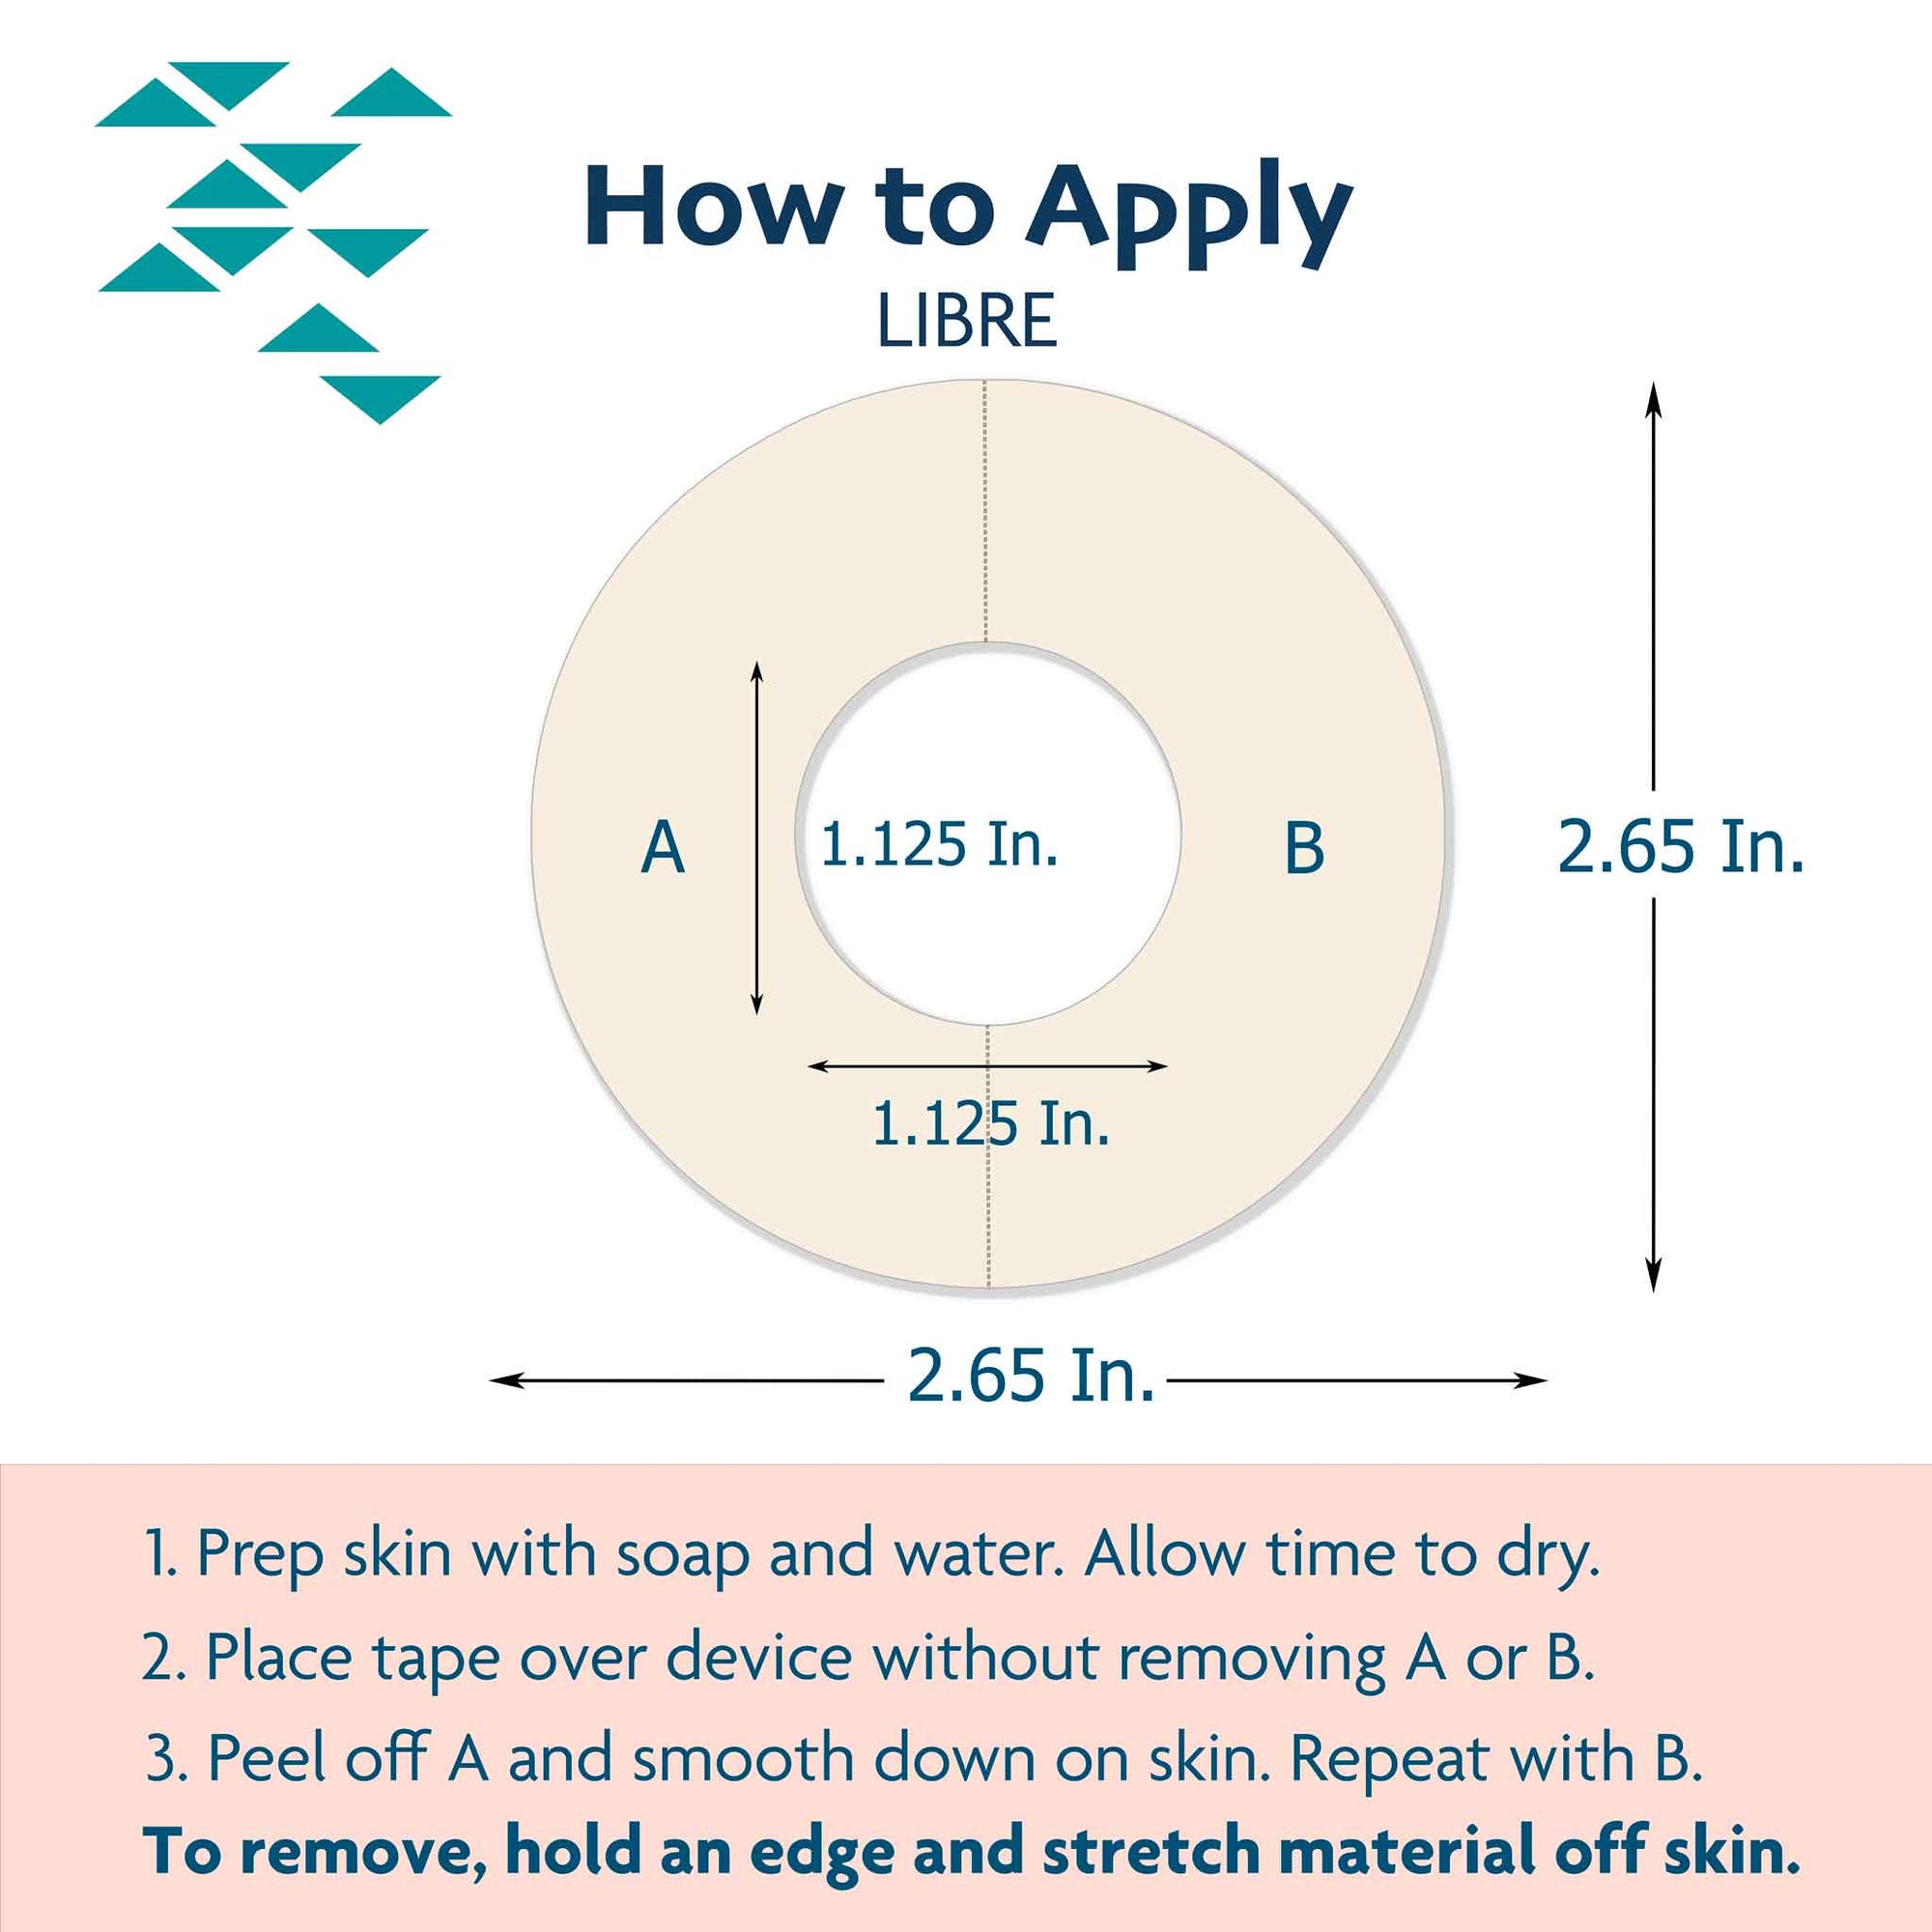 ExpressionMed Libre Guide for Proper Application on cgm device